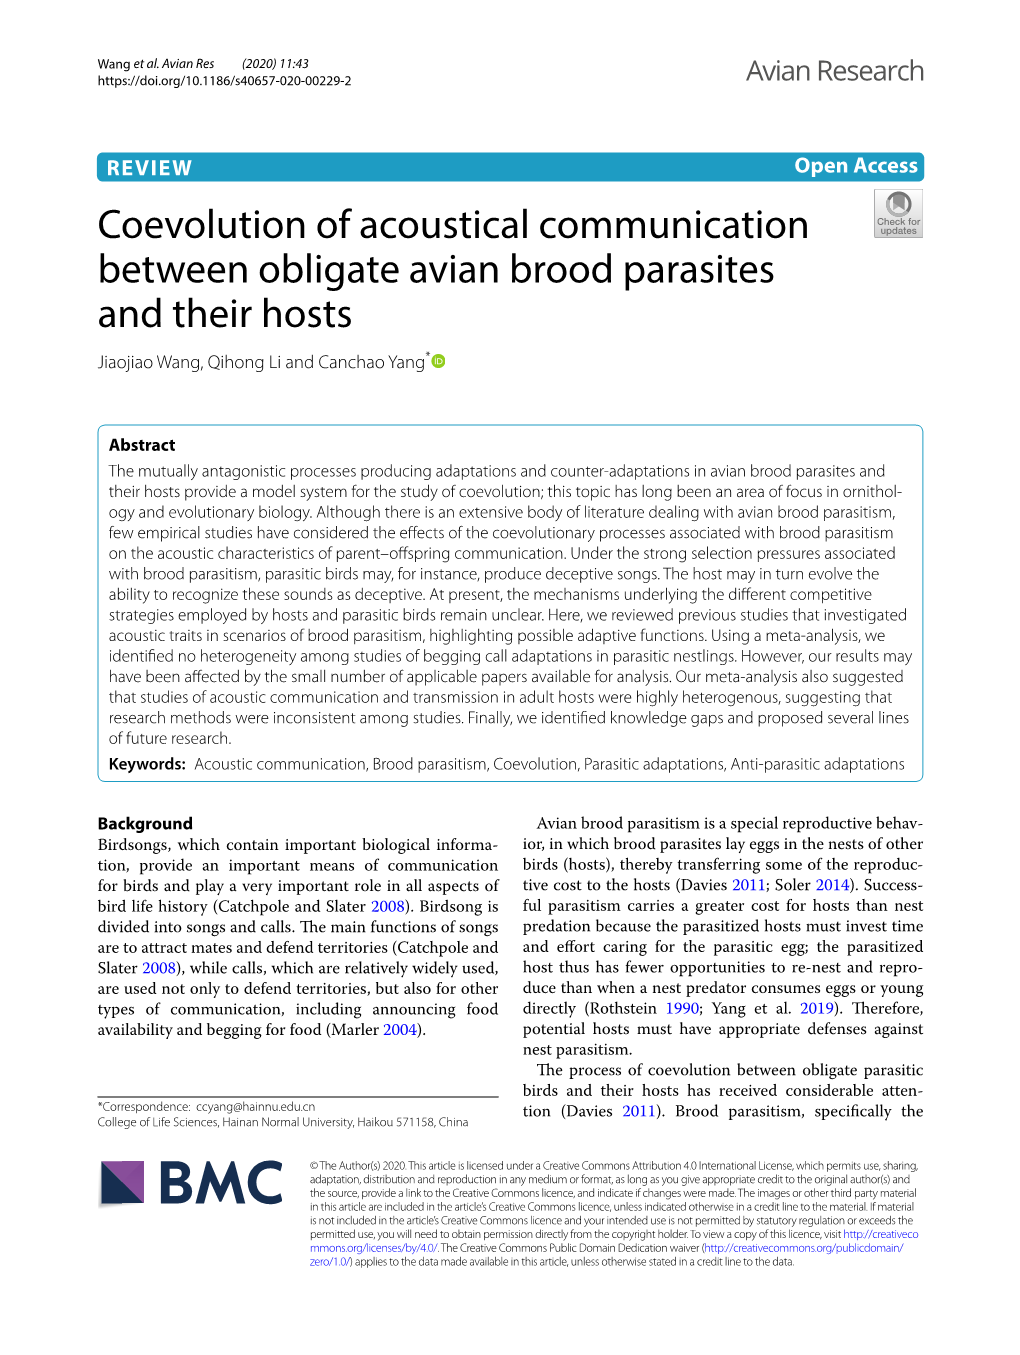 Coevolution of Acoustical Communication Between Obligate Avian Brood Parasites and Their Hosts Jiaojiao Wang, Qihong Li and Canchao Yang*